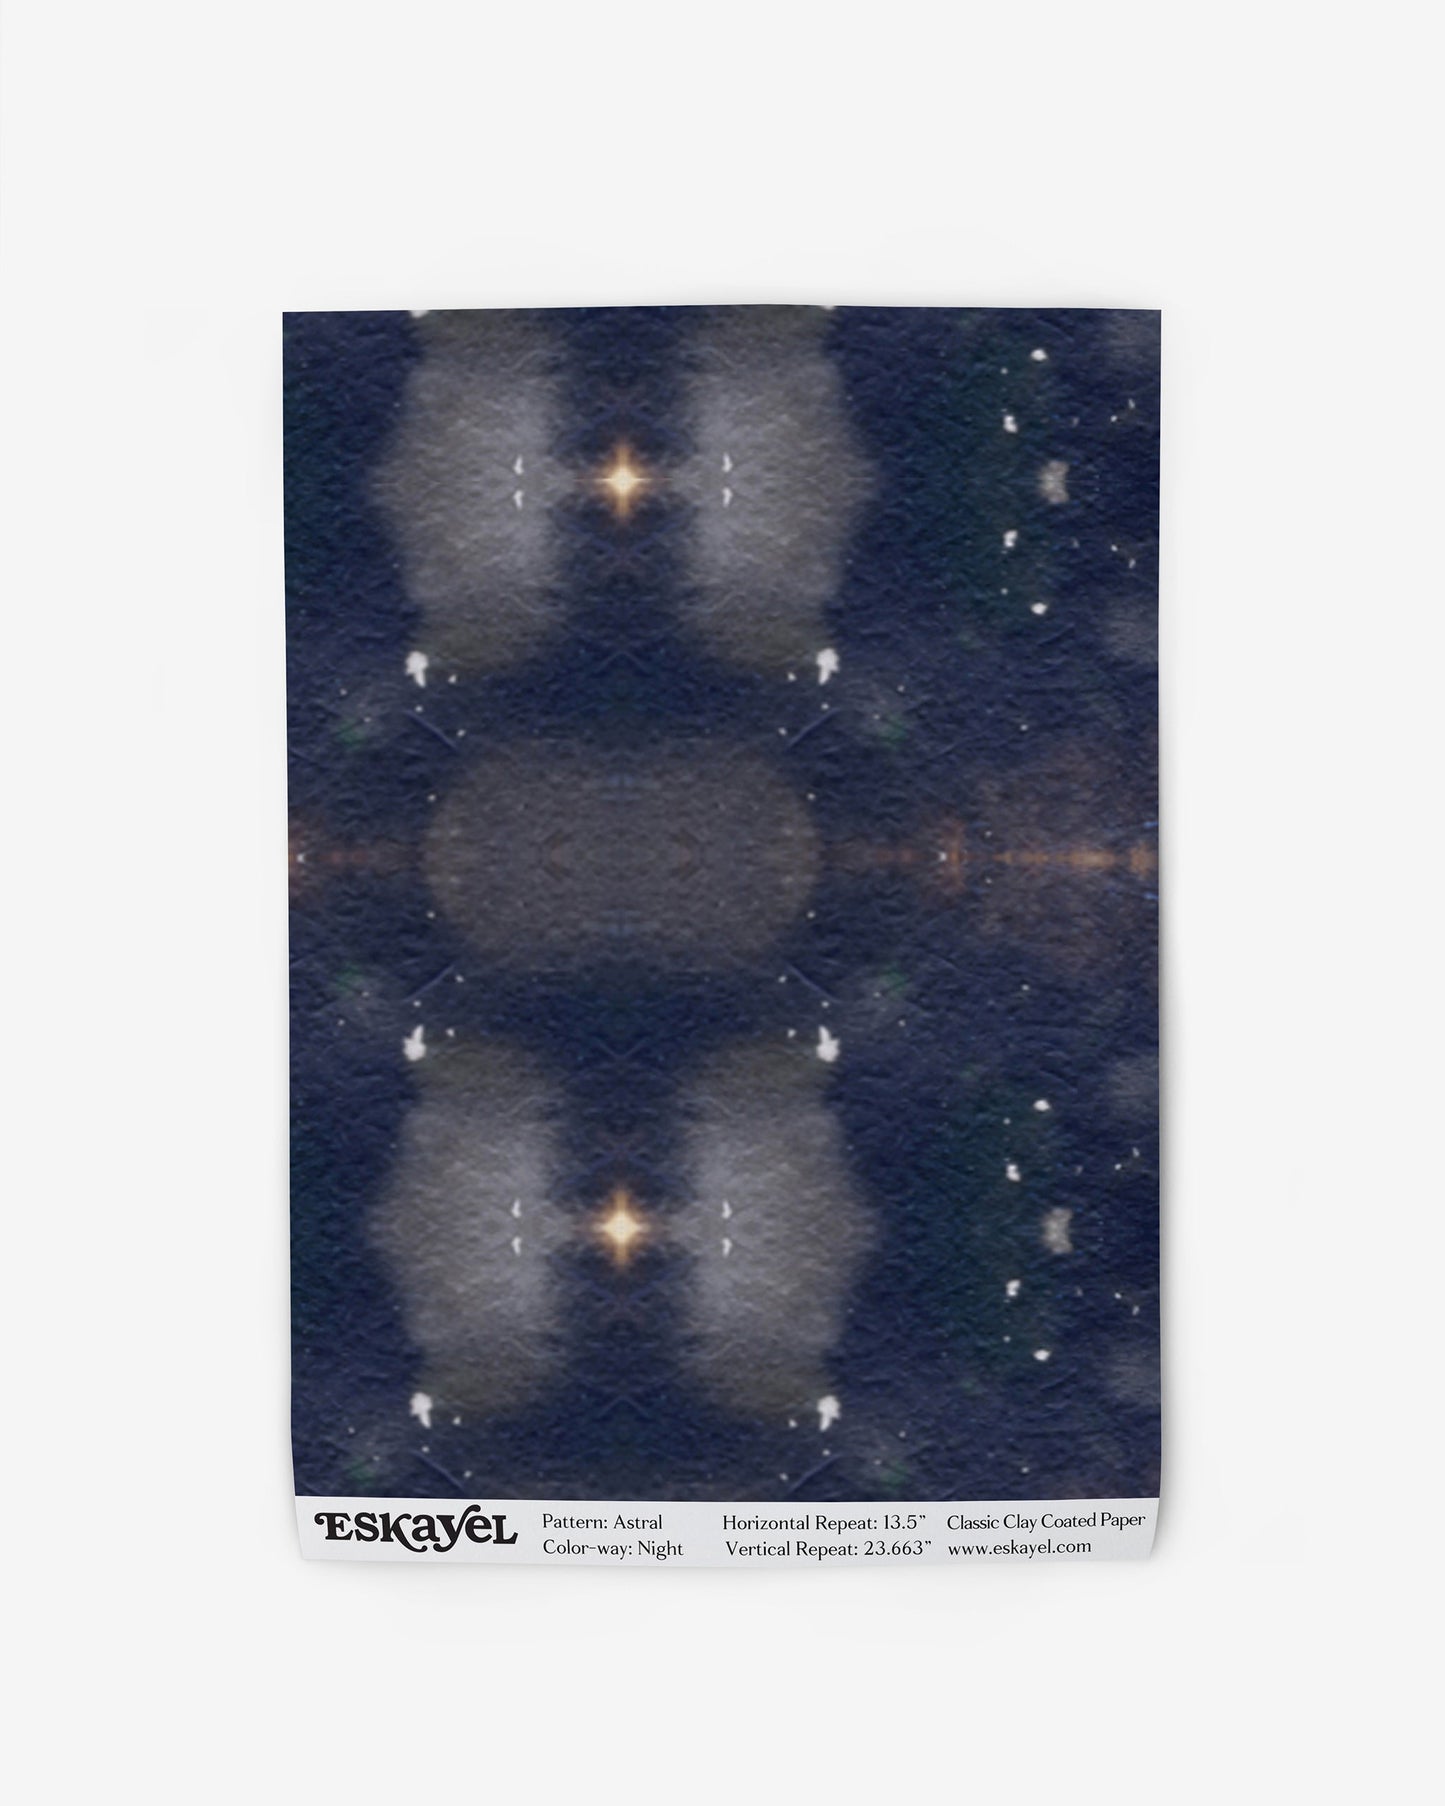 A blue and white Astral Wallpaper Night with stars from the Astral Jangala Collection